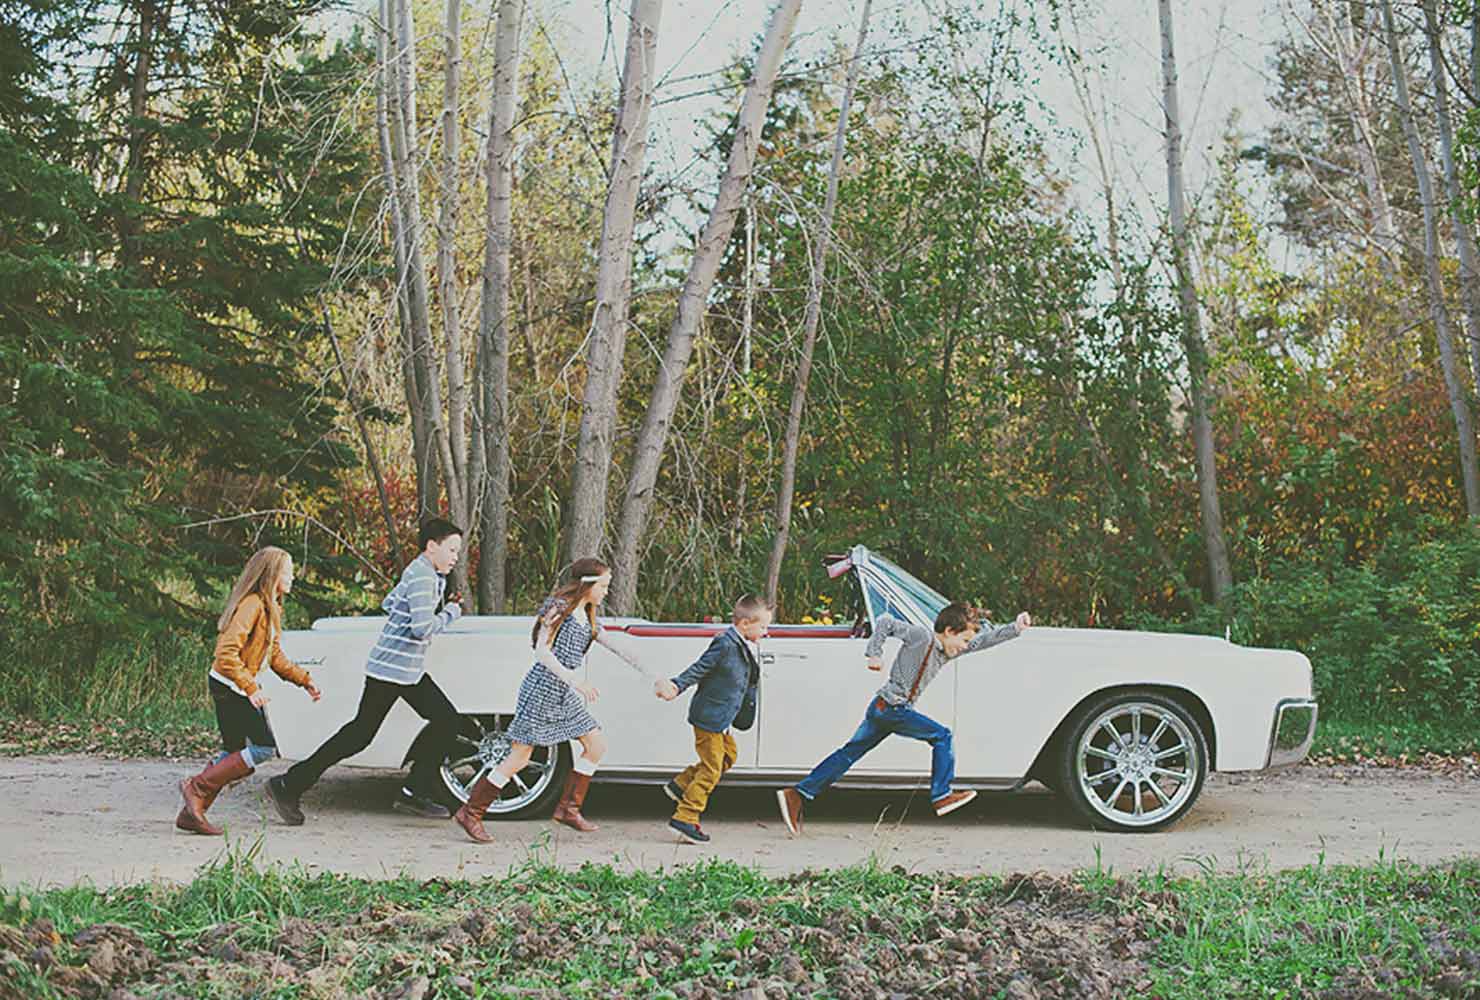 sibling photo ideas running by car